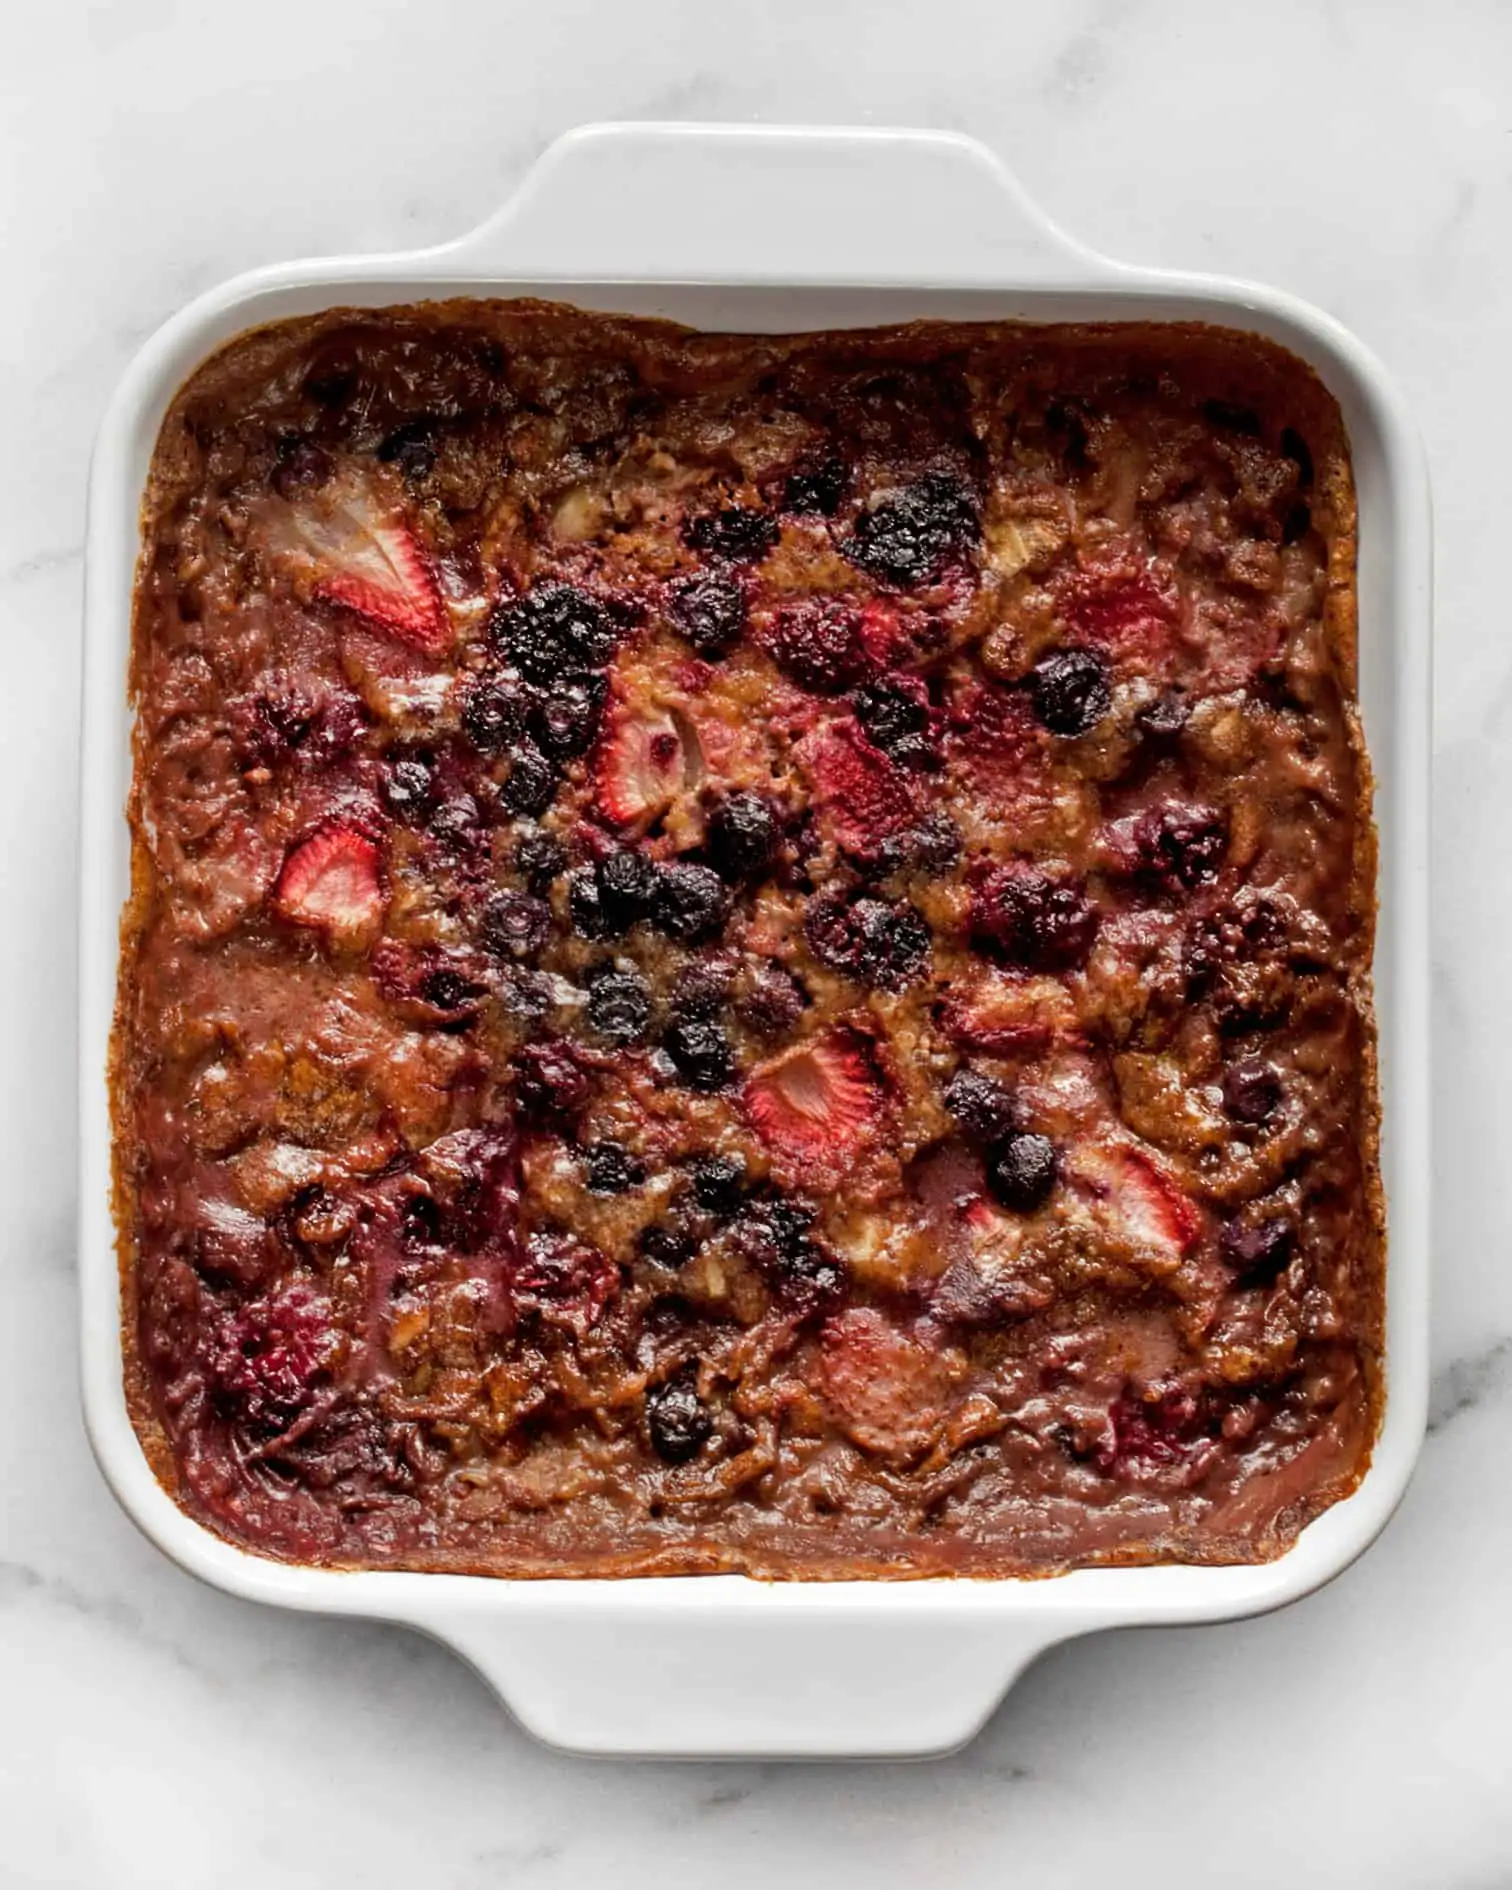 Baked oatmeal in the dish